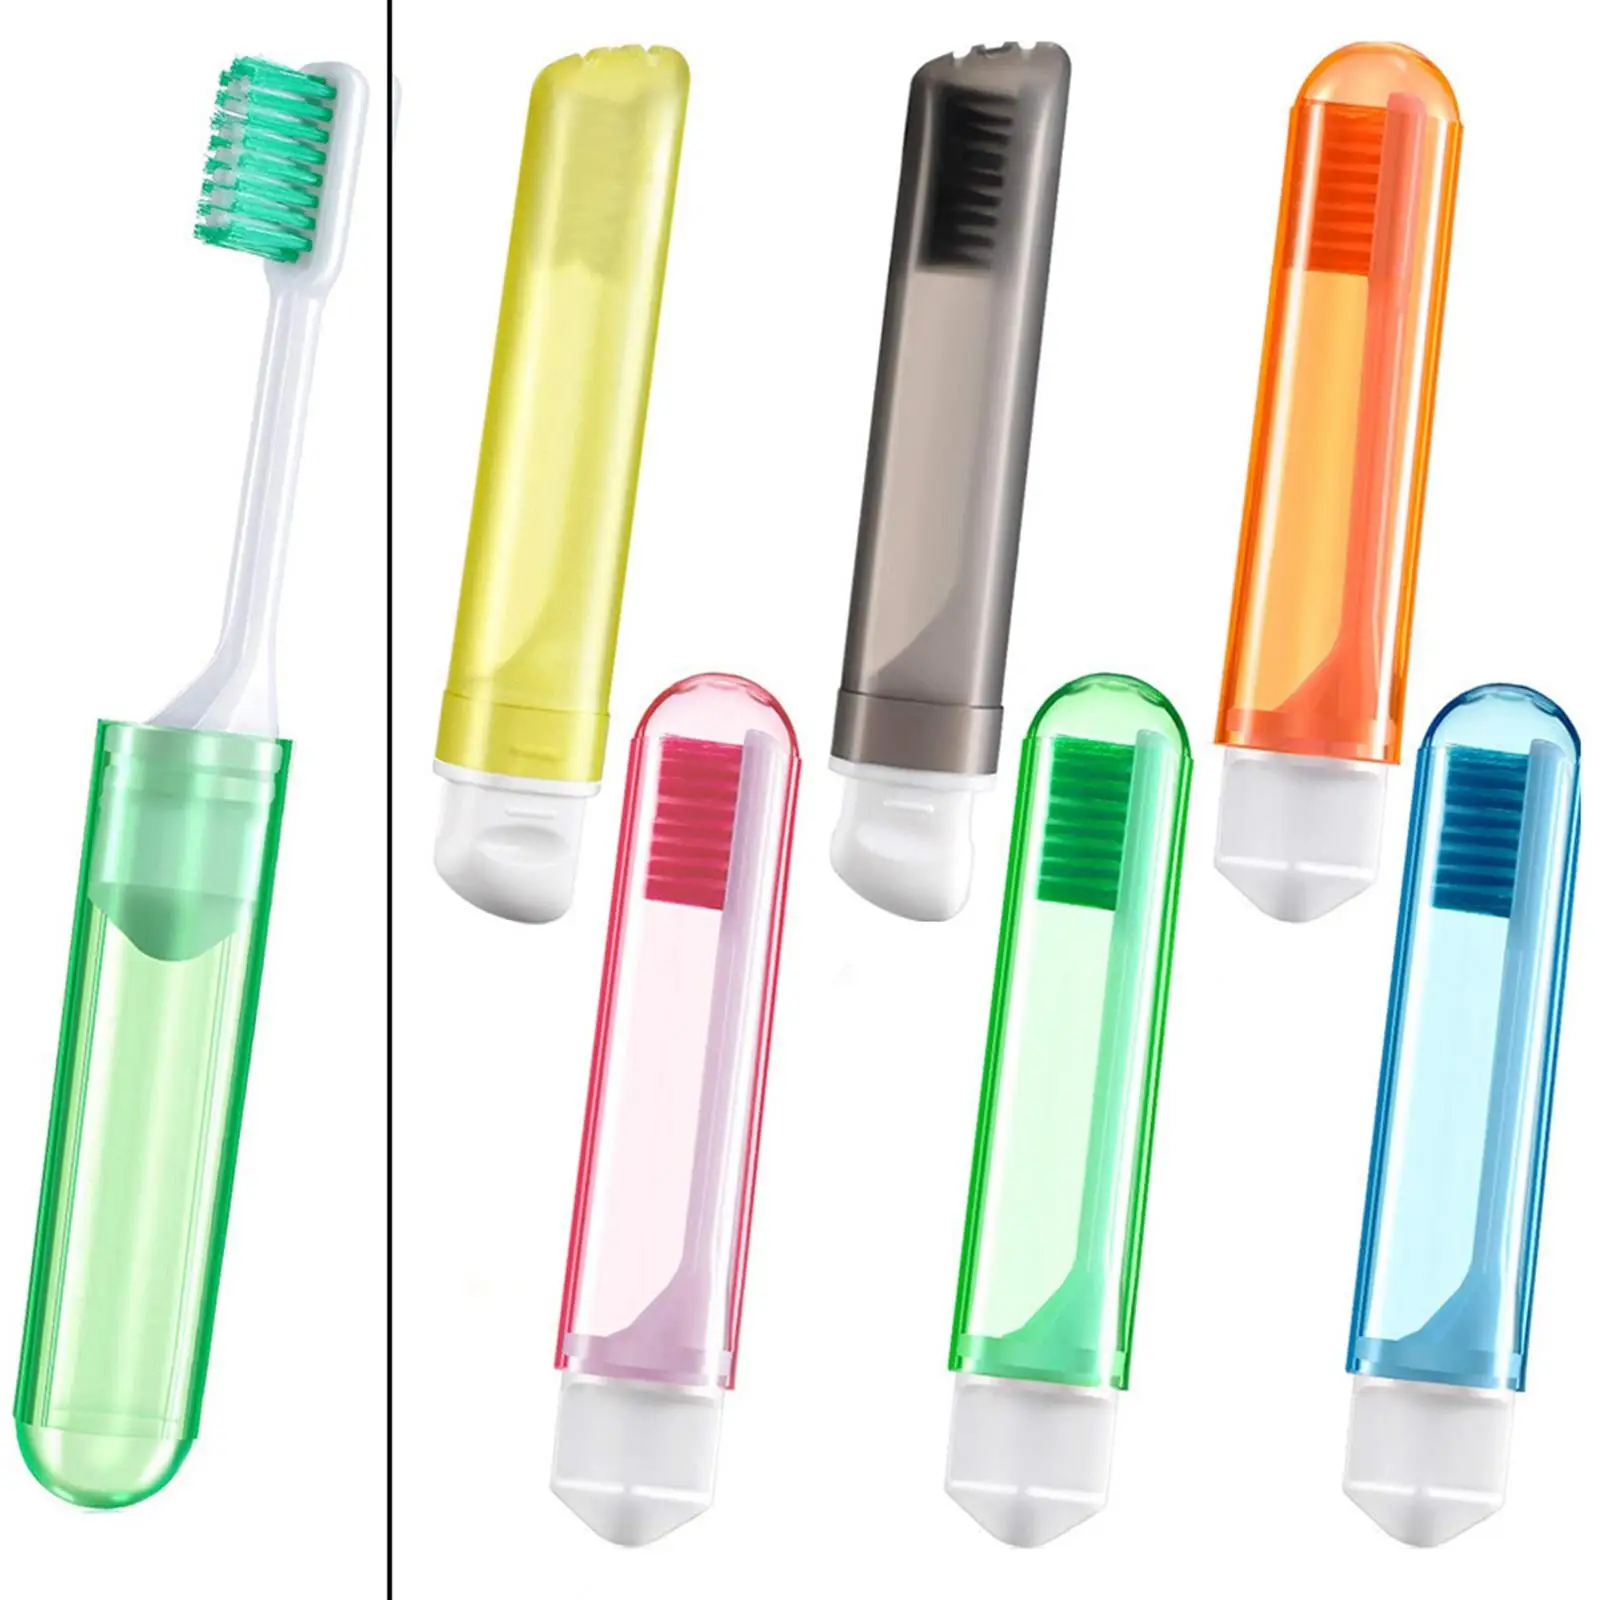 6 Pcs Portable Folding Toothbrush Soft Bristle Foldable Travel Toothbrush for Camping Holidays Backpack Business Girl Boy